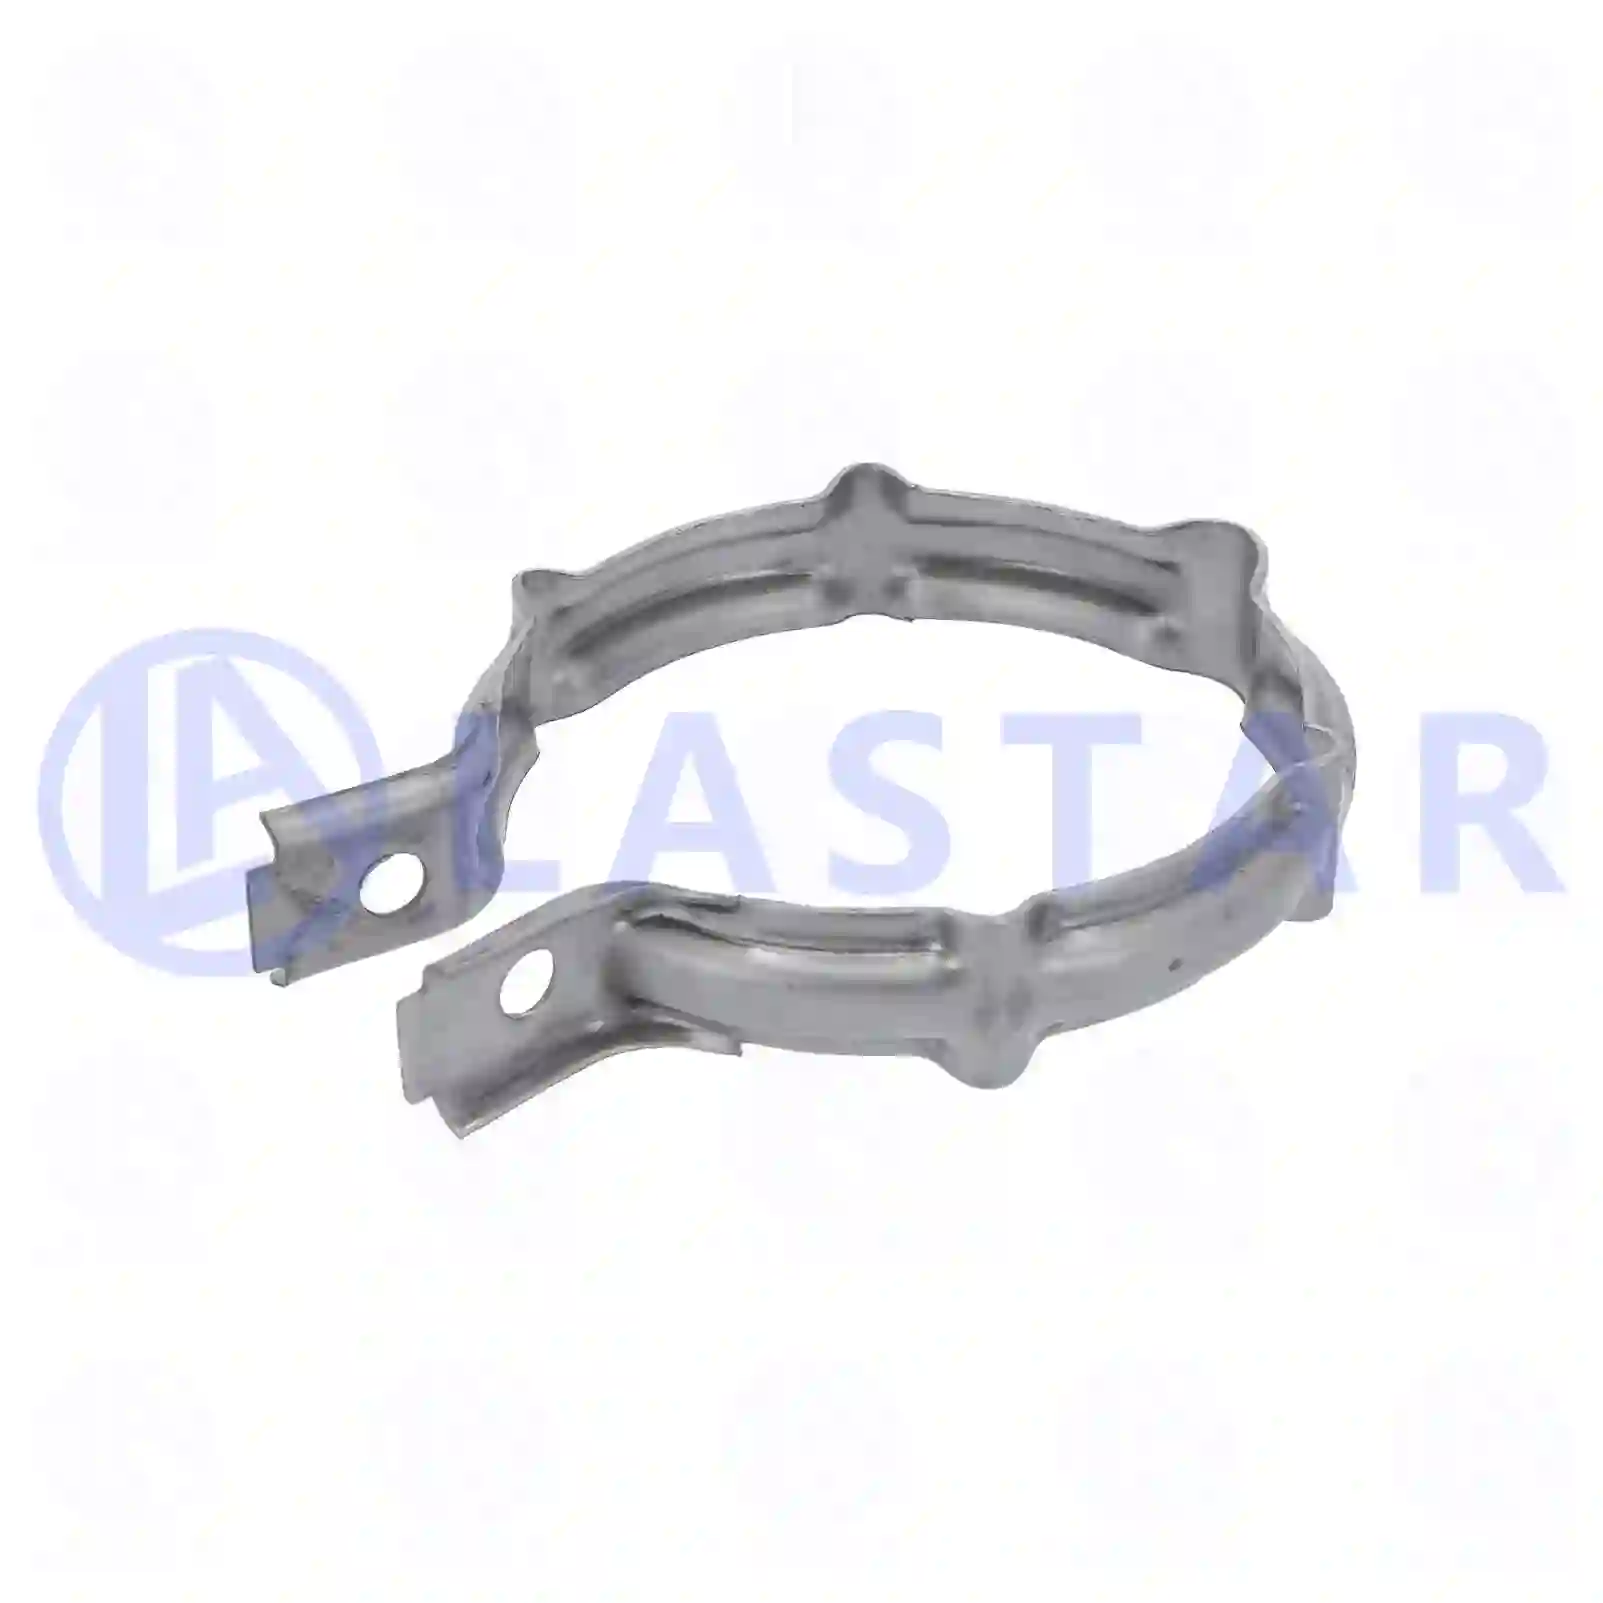 Clamp, 77706862, 06674104153, 7401629499, 1629499, ZG10264-0008 ||  77706862 Lastar Spare Part | Truck Spare Parts, Auotomotive Spare Parts Clamp, 77706862, 06674104153, 7401629499, 1629499, ZG10264-0008 ||  77706862 Lastar Spare Part | Truck Spare Parts, Auotomotive Spare Parts